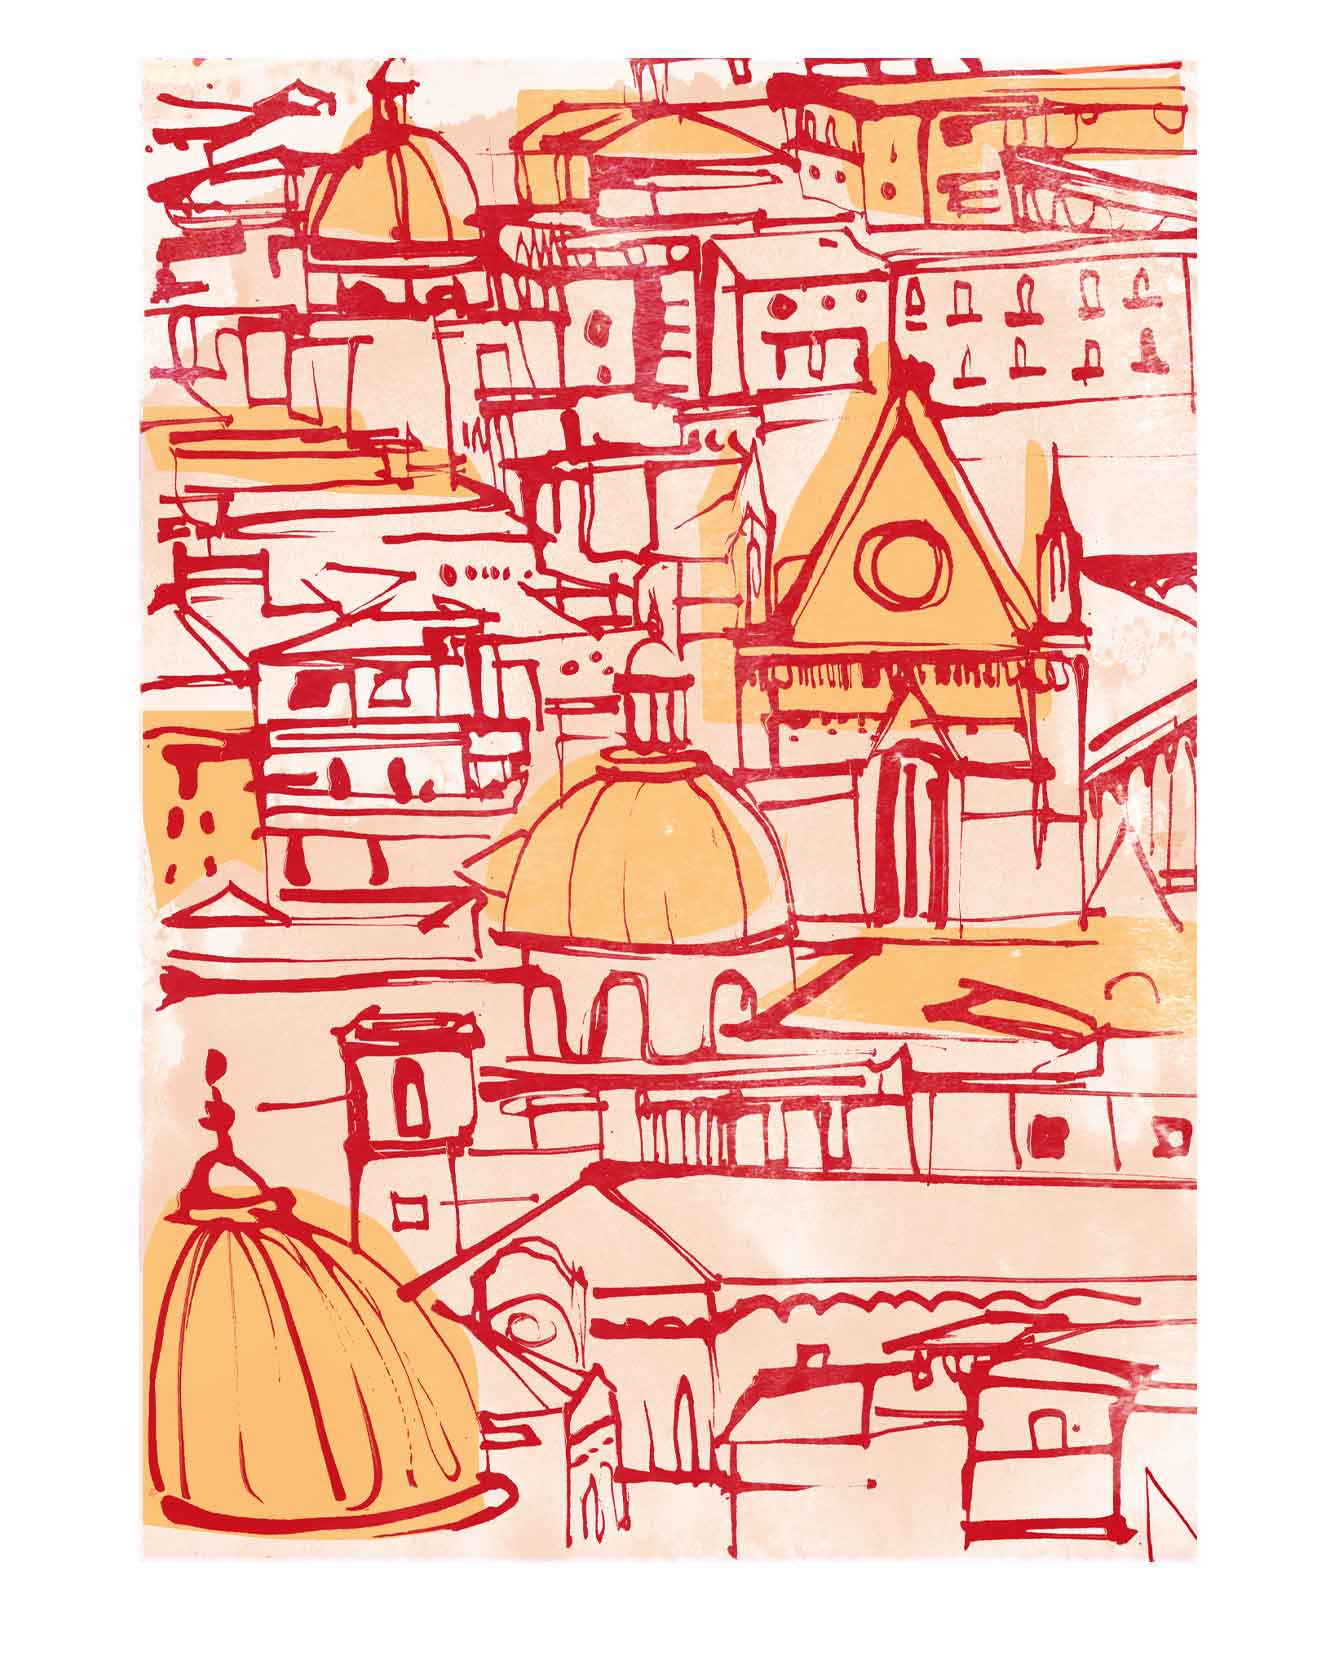 Detail. Silk scarf illustration. Inspired by Italian city of Naples for fashion brand Kiton, who's headquarters are in the ancient Italian city. Simple linear style illustration and flat colours taken from the fashion houses upcoming collections. With drawings of famous Naples landmarks and architecture.